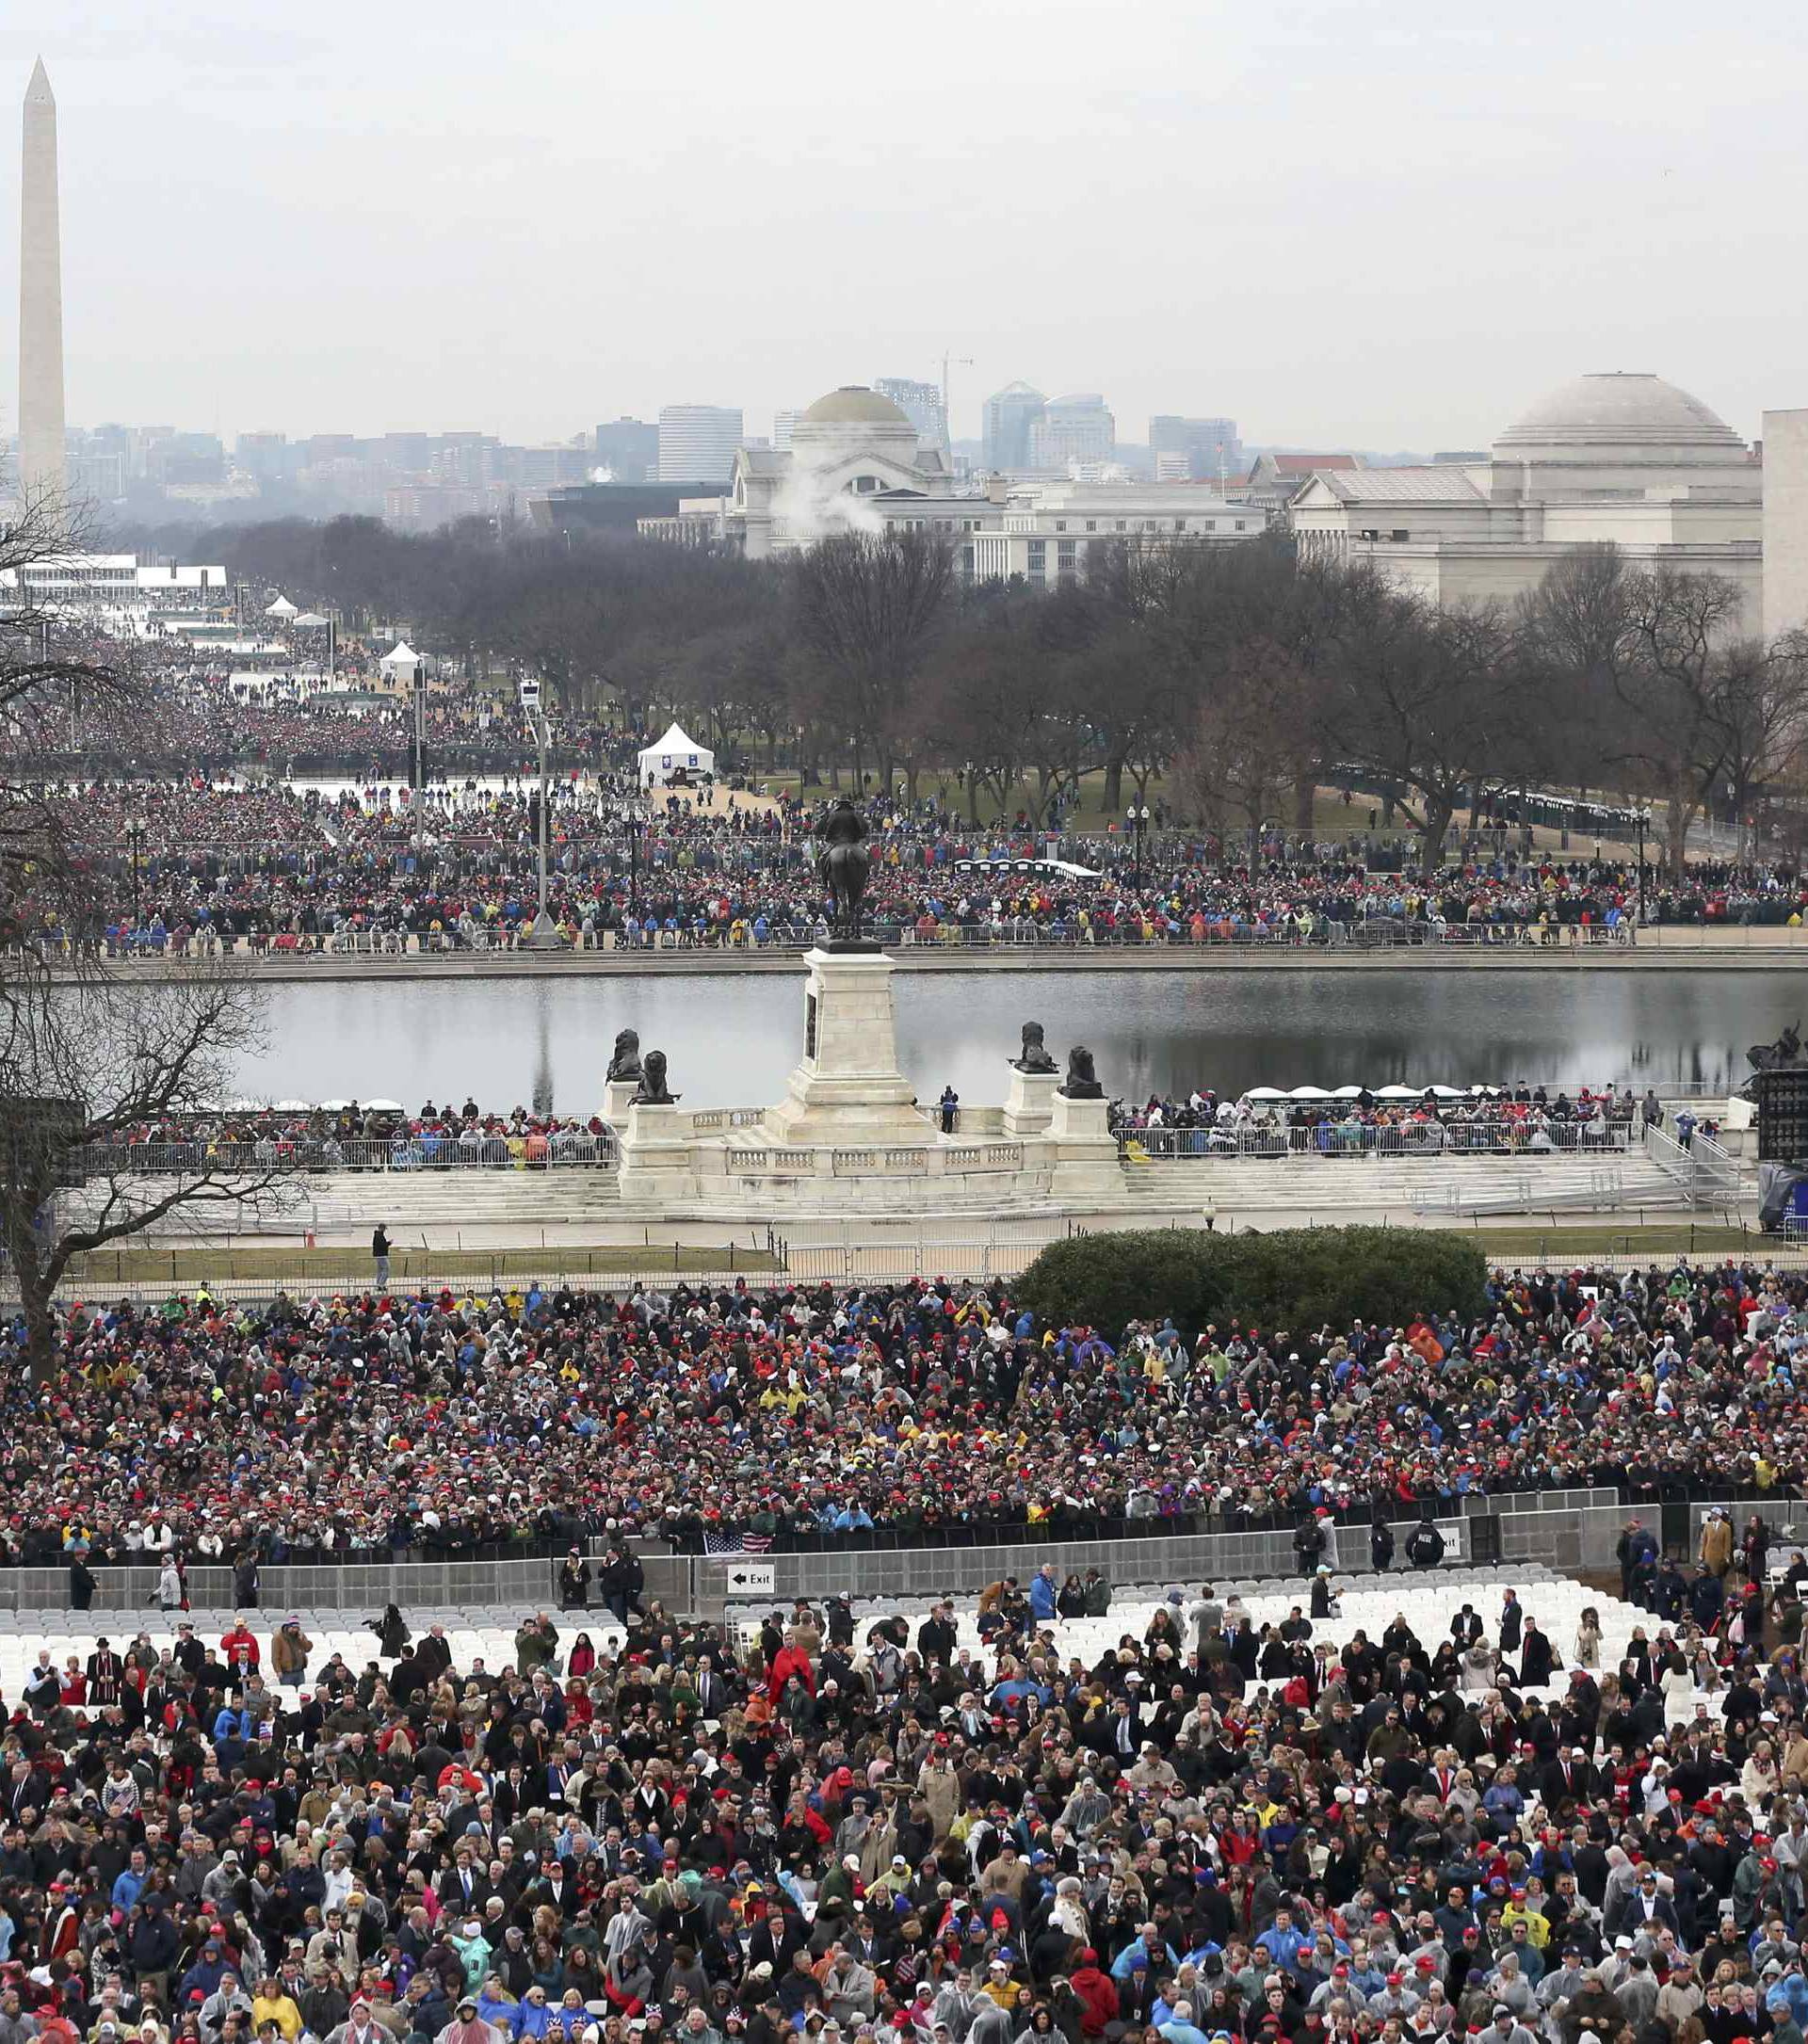 Spectators await the inauguration ceremonies swearing in Donald Trump as the 45th president of the United States on the West front of the U.S. Capitol in Washington